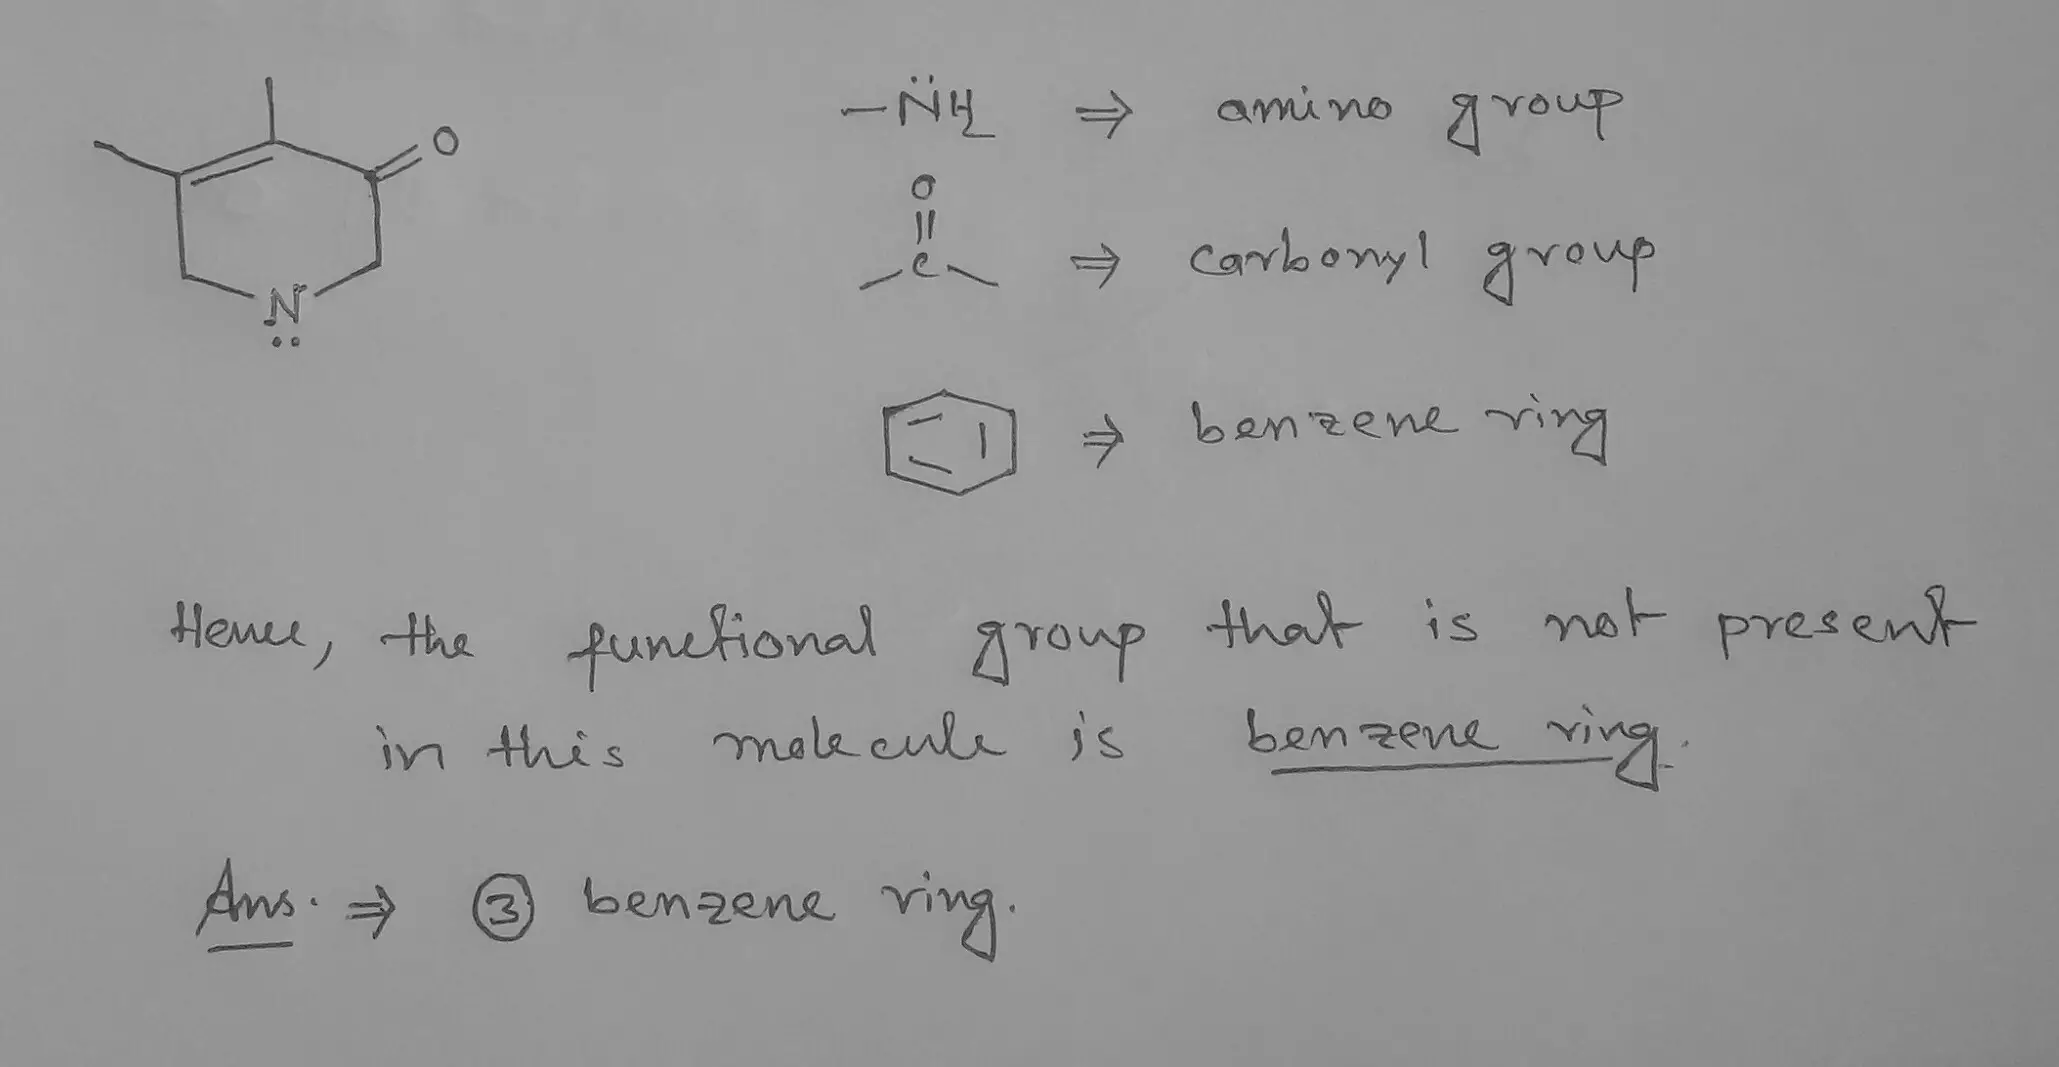 Question 29 (1 point) Which functional group is not present in the molecule shown here? 1) carbonyl group 2) amino group 3) benzene ring 4] All of the functional groups mentioned above appear in this molecule.